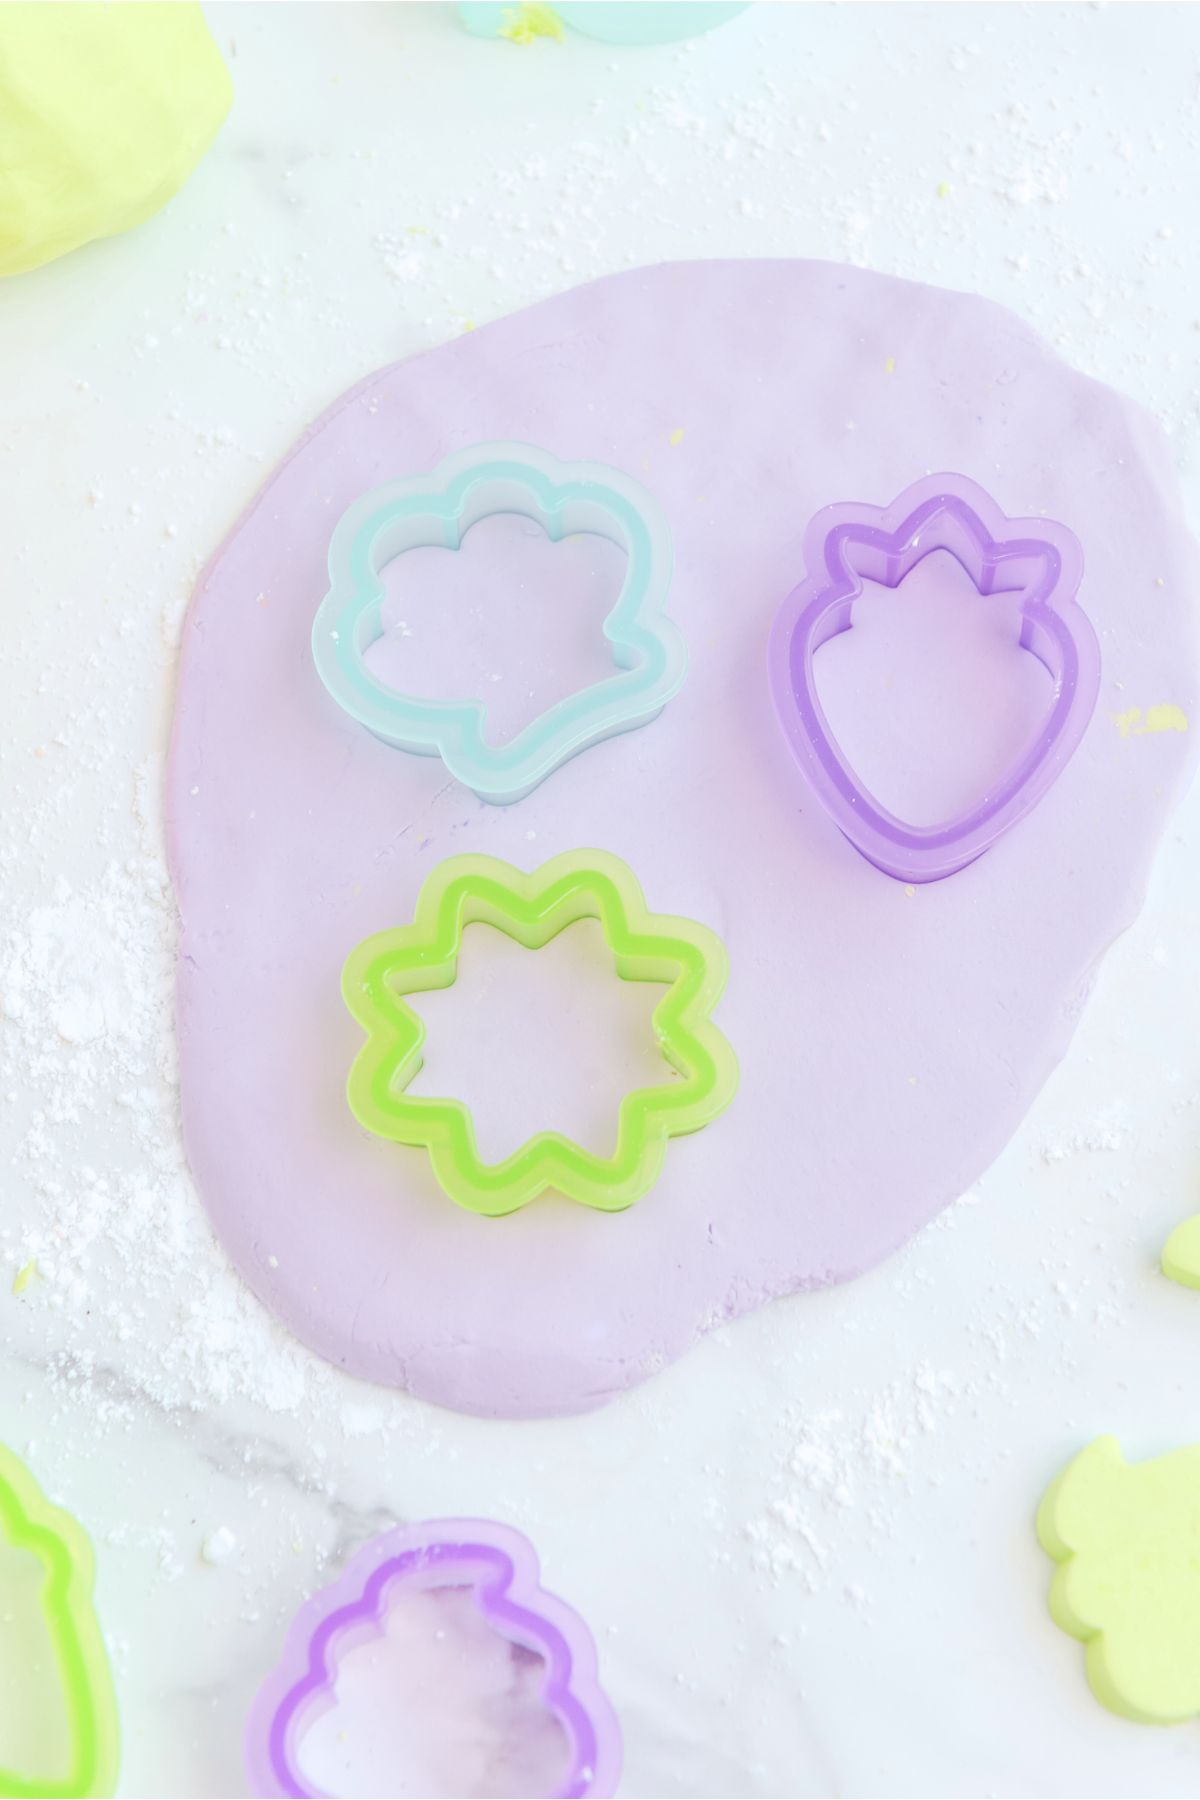 playdough flatten and cut into different shapes with cookie cutter.